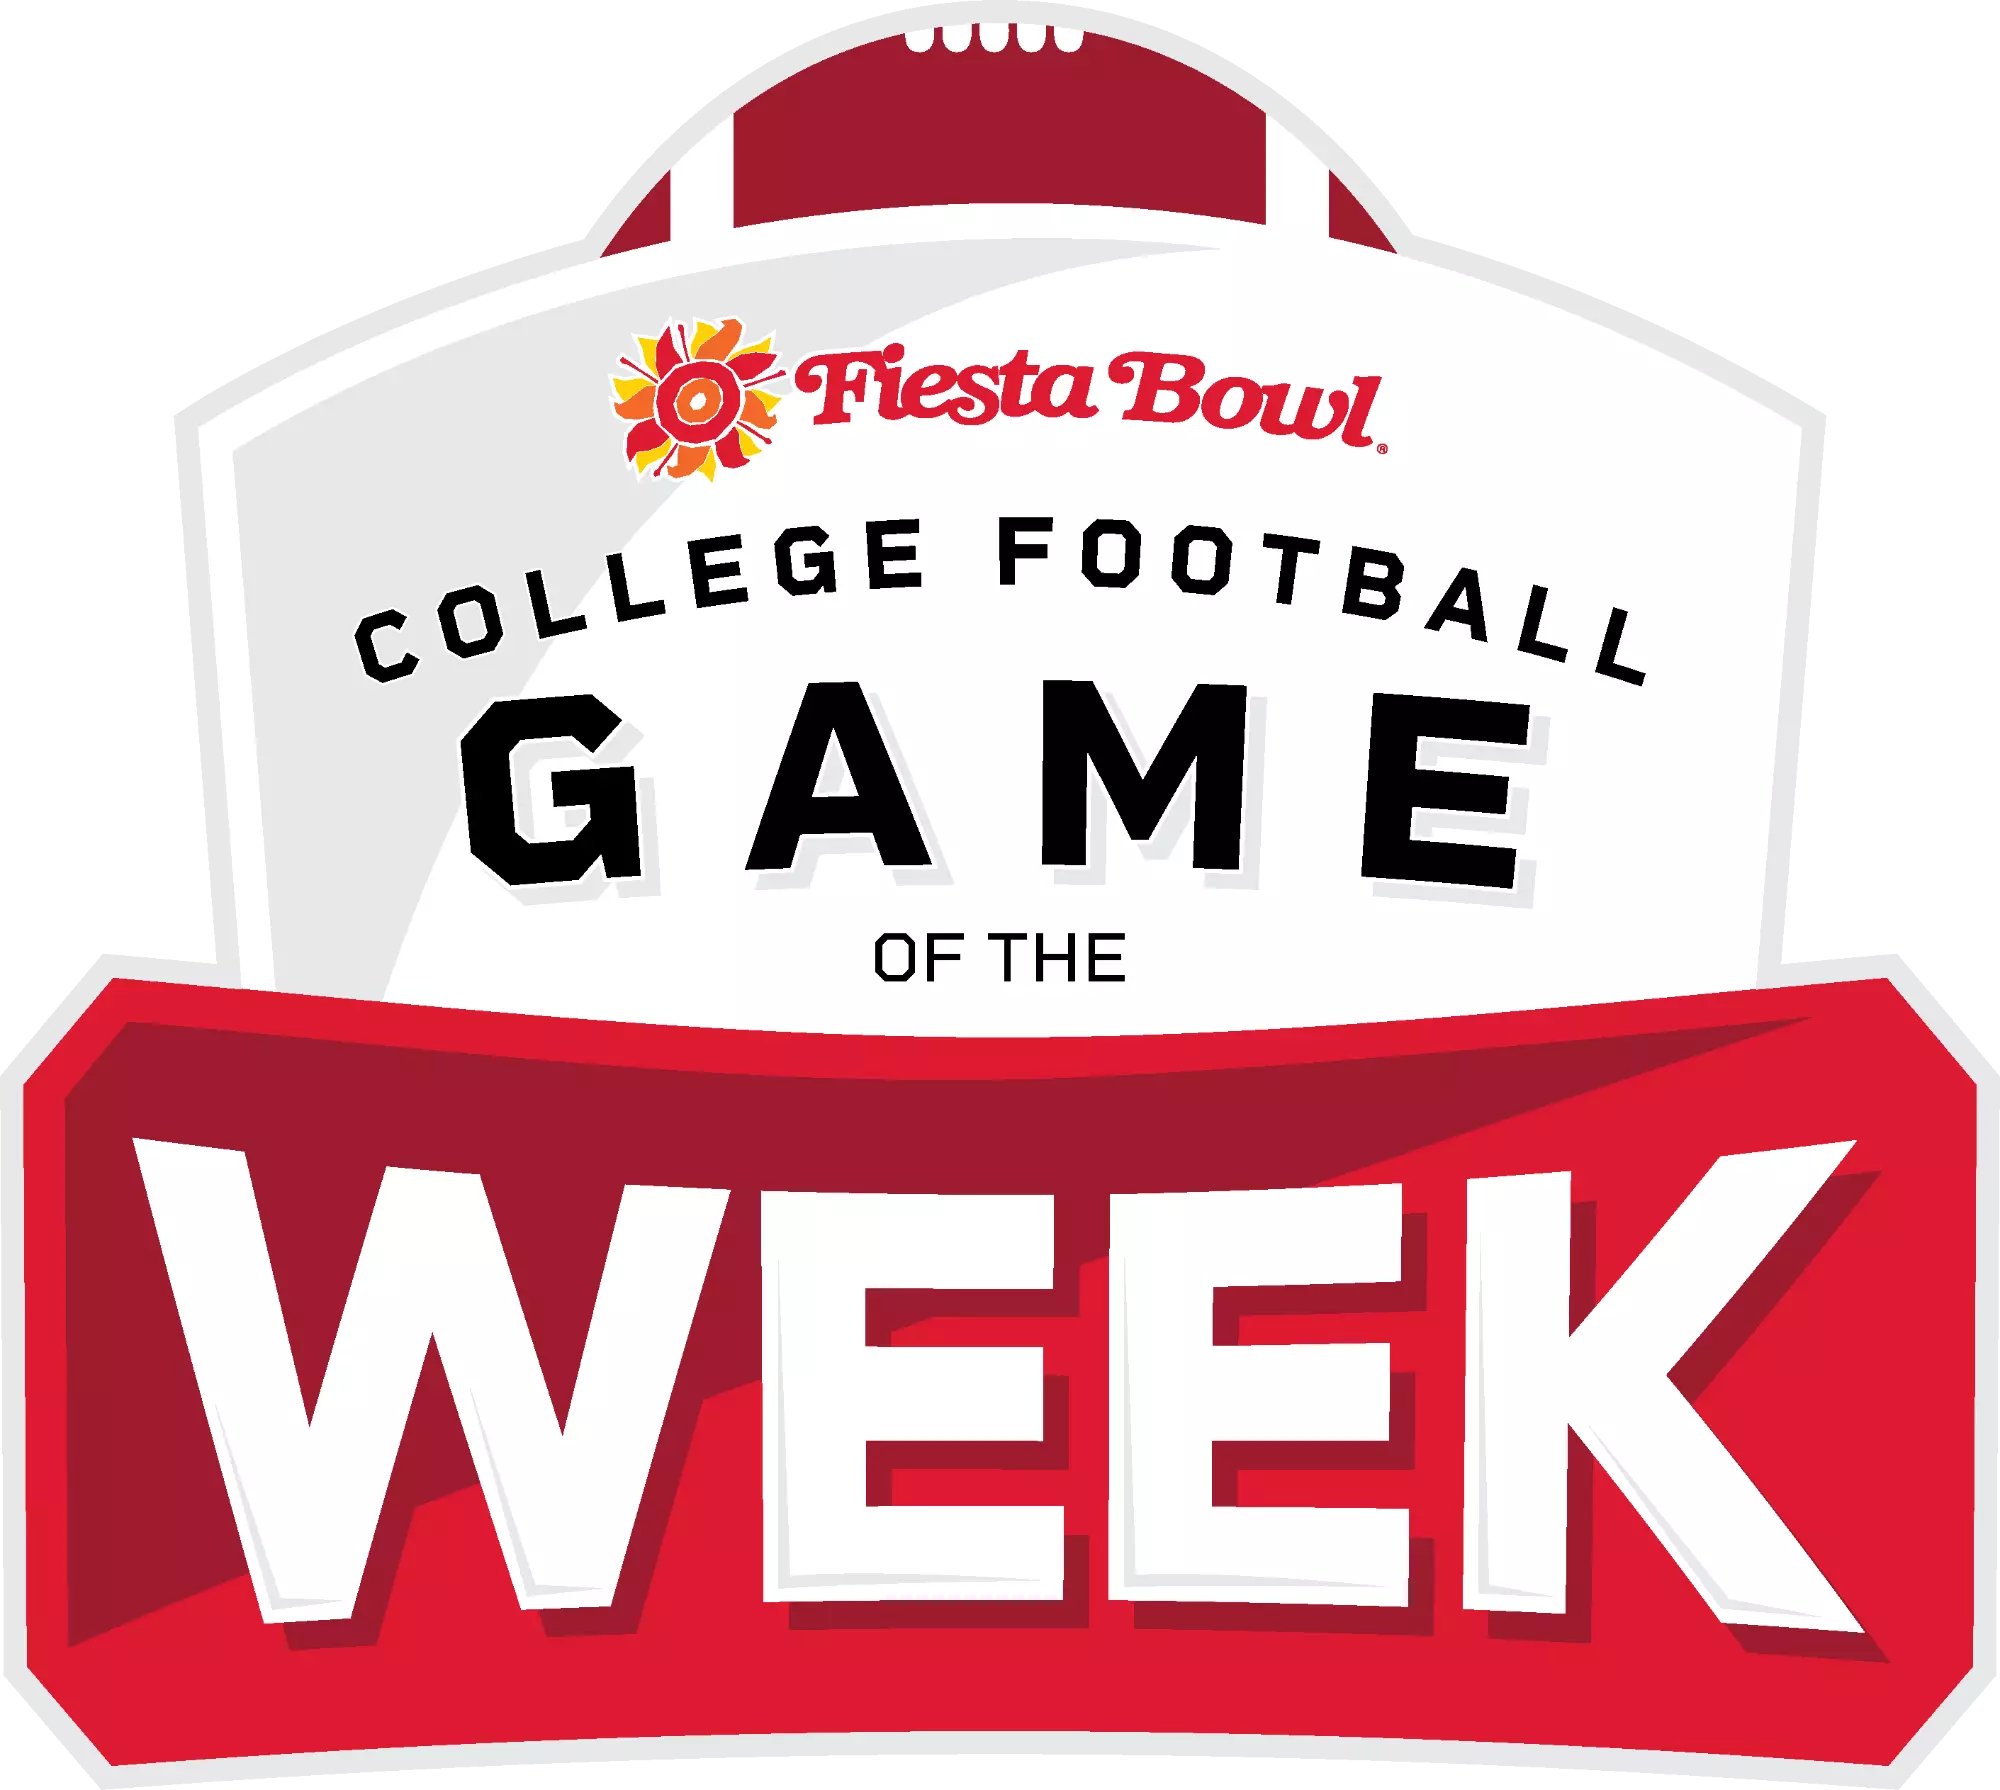 College Football Game of the Week Logo